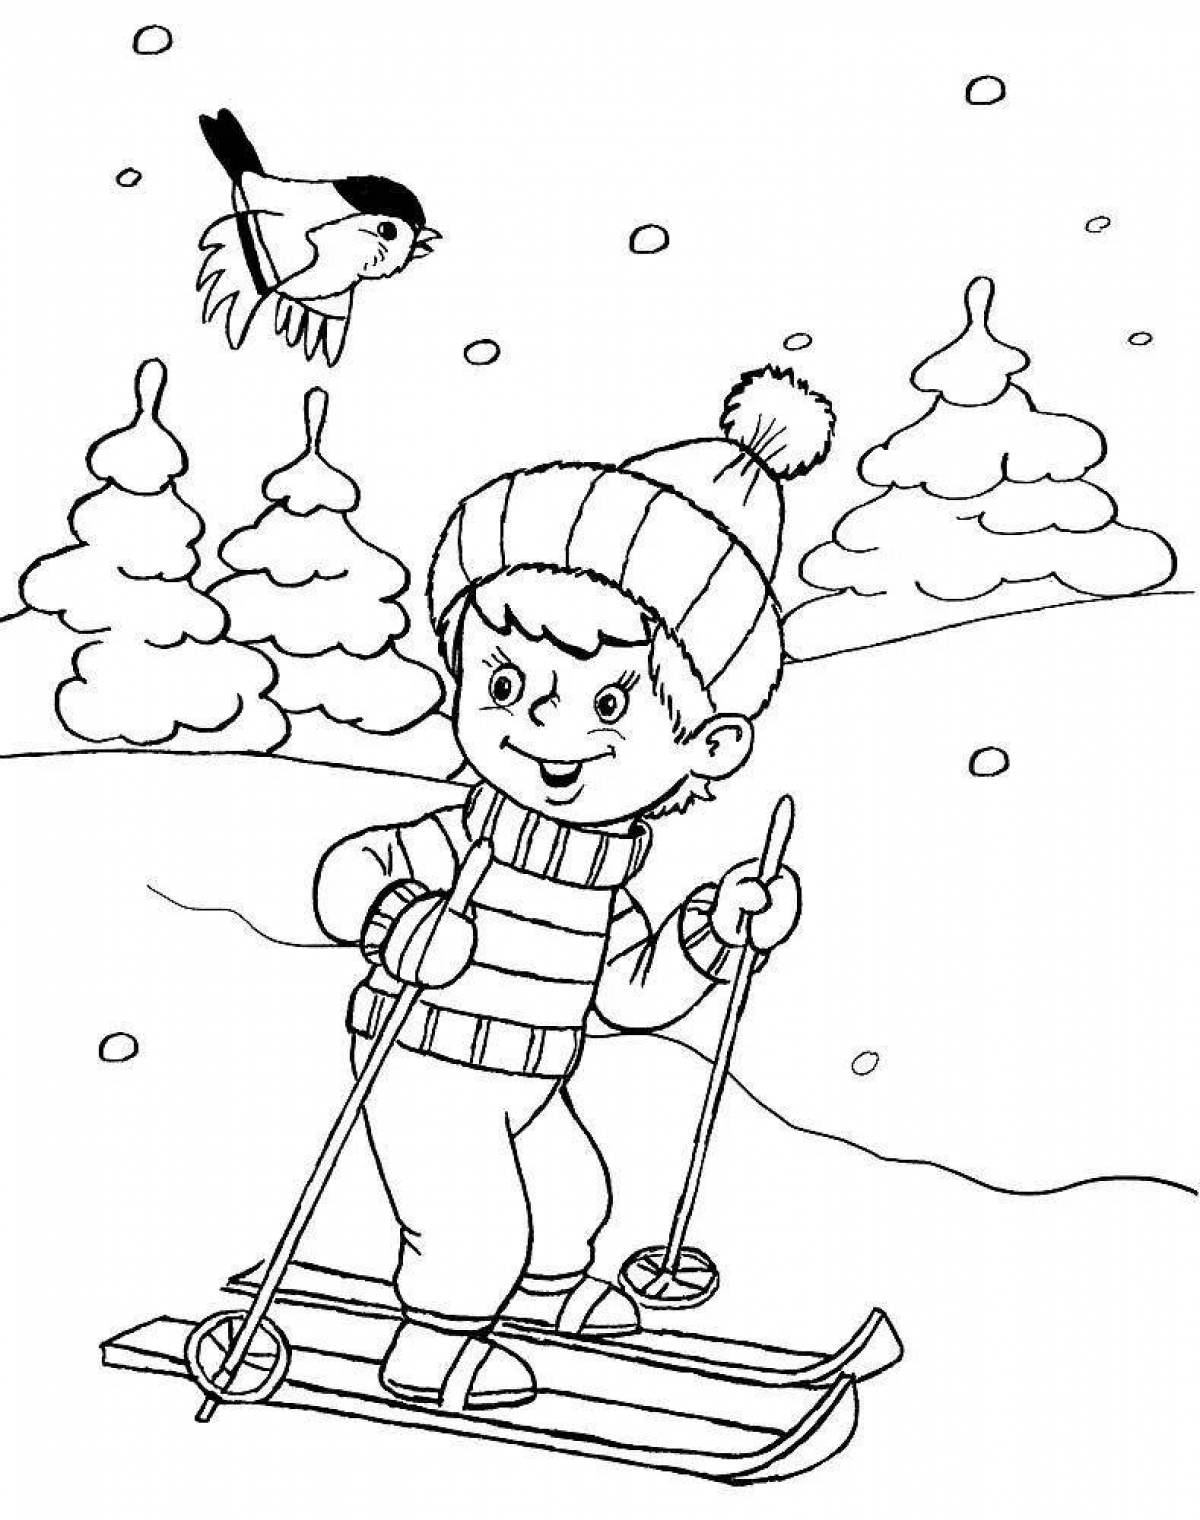 Coloring page inviting winter walk